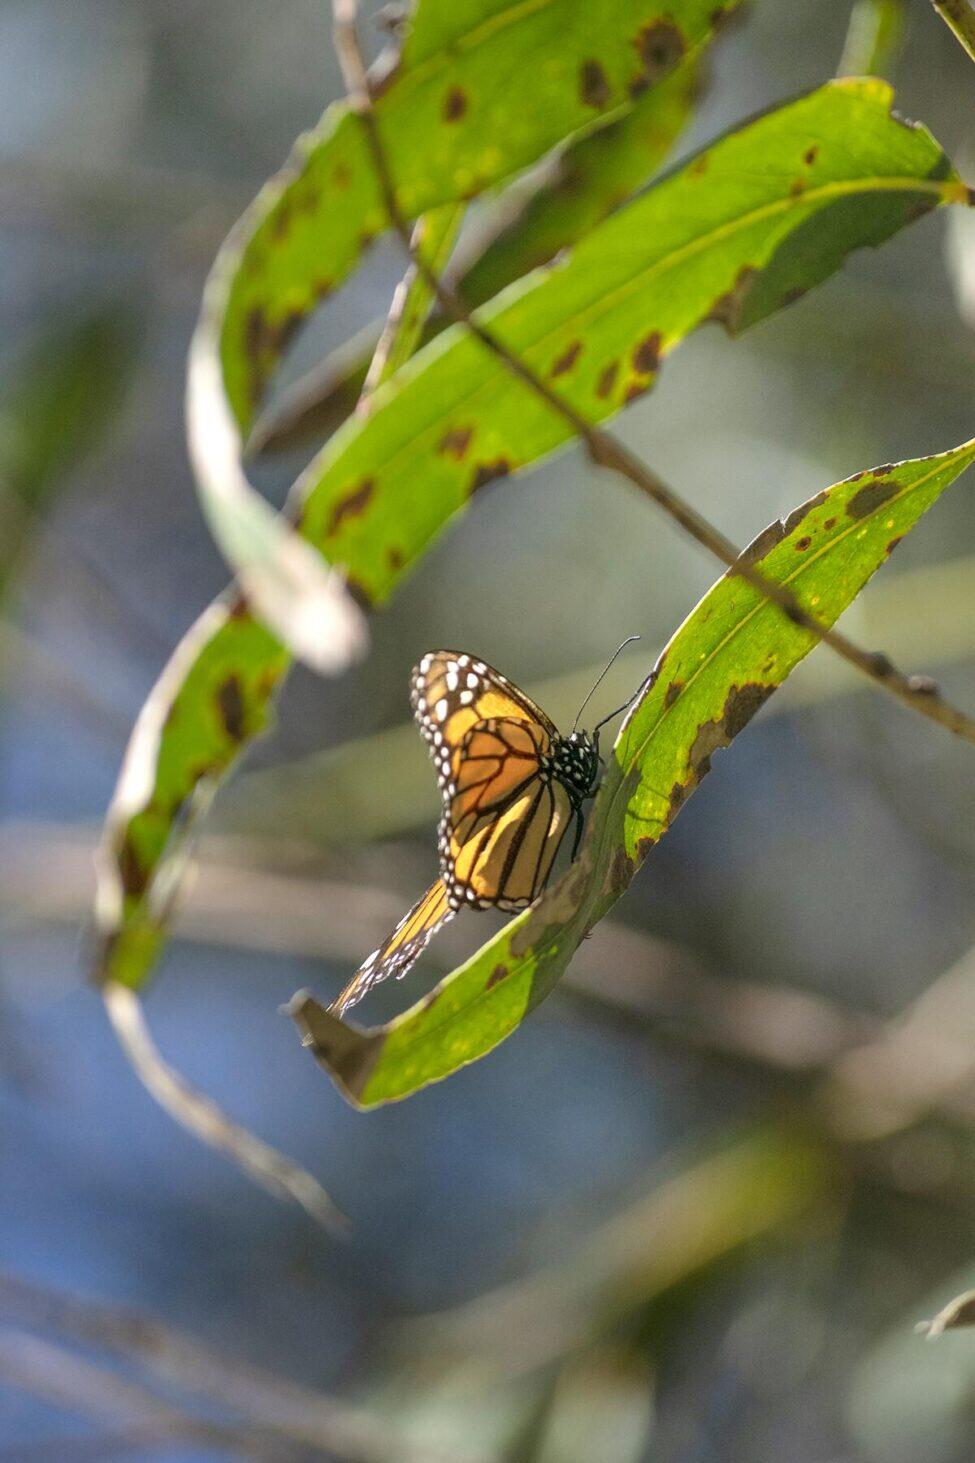 Where Can I See Monarch Butterflies in California This Winter?